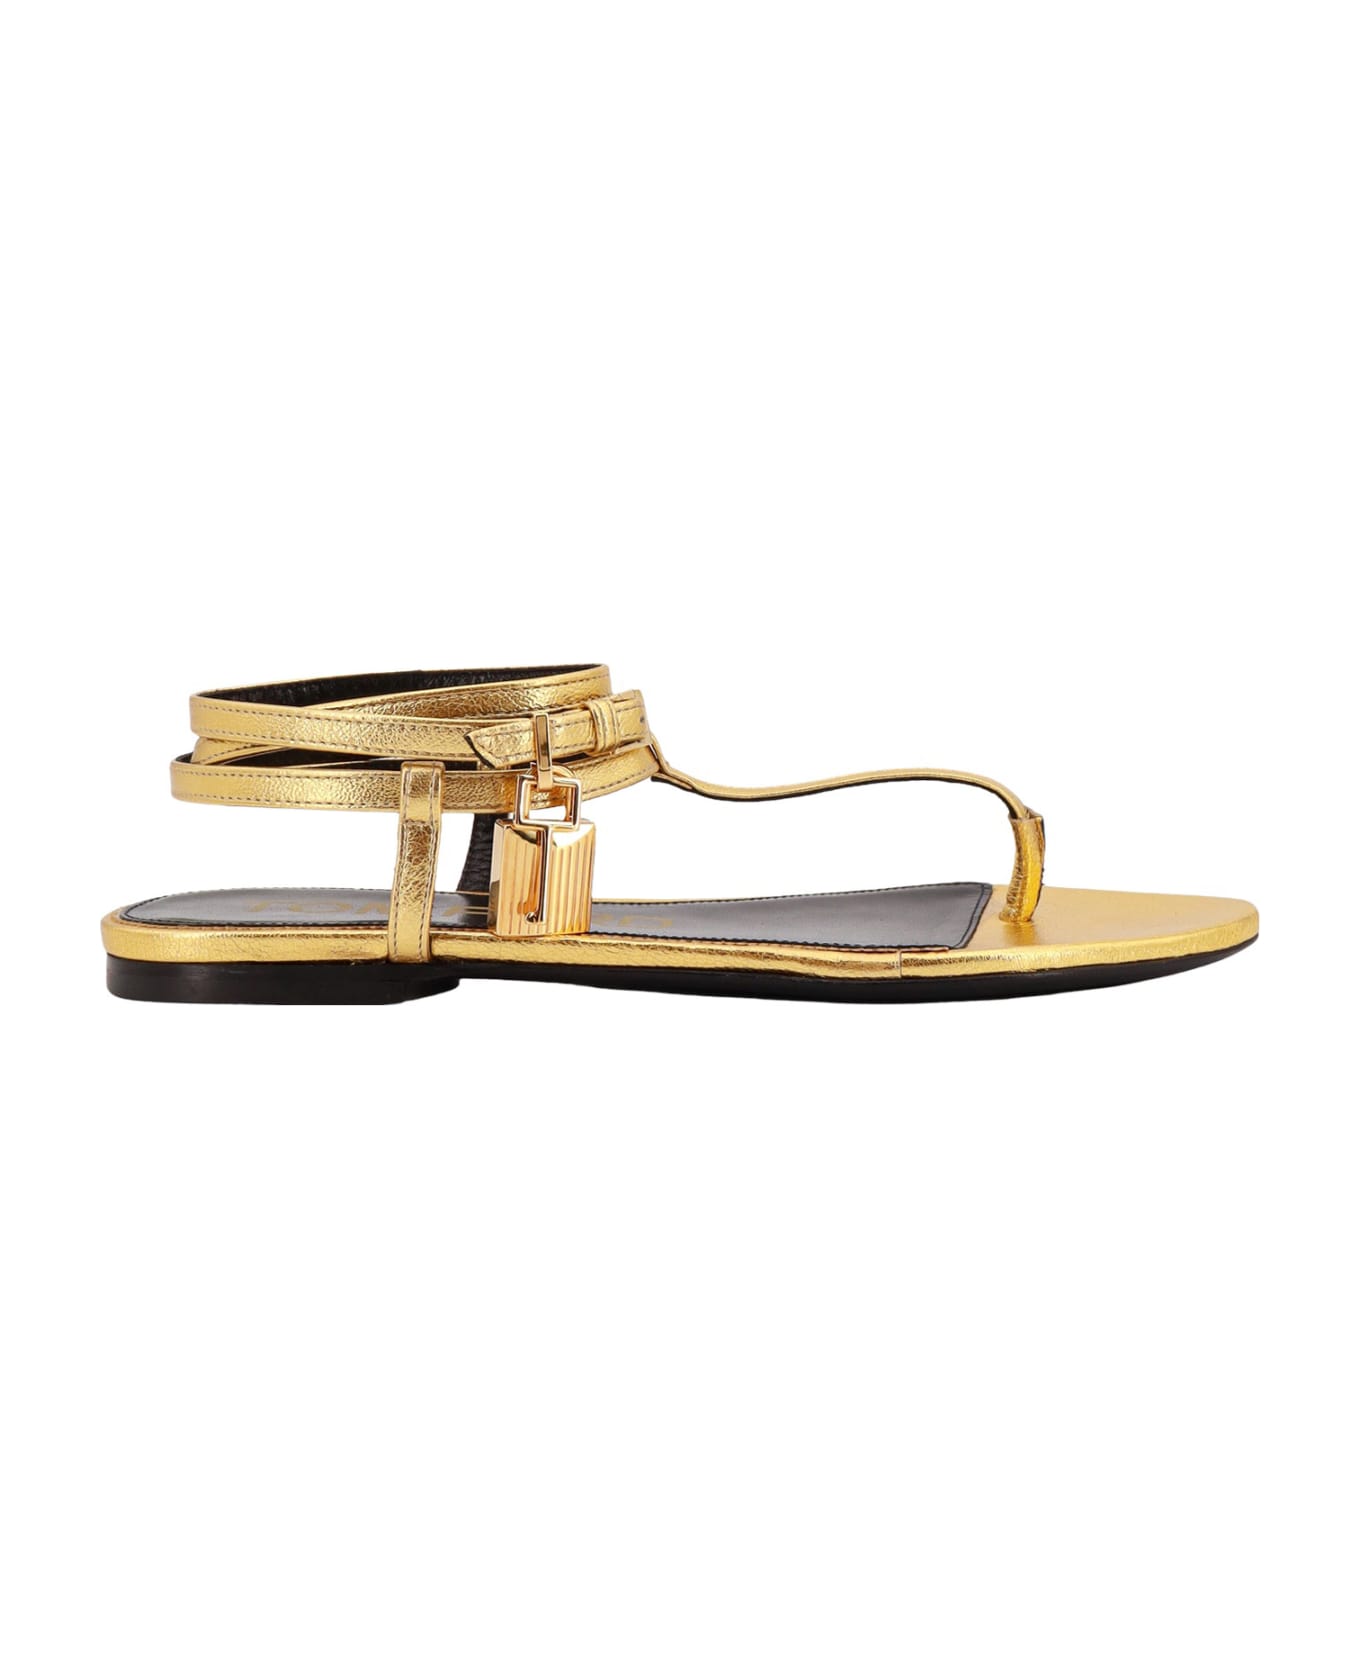 Tom Ford Ankle Strap Metallic Flat Sandals - Gold